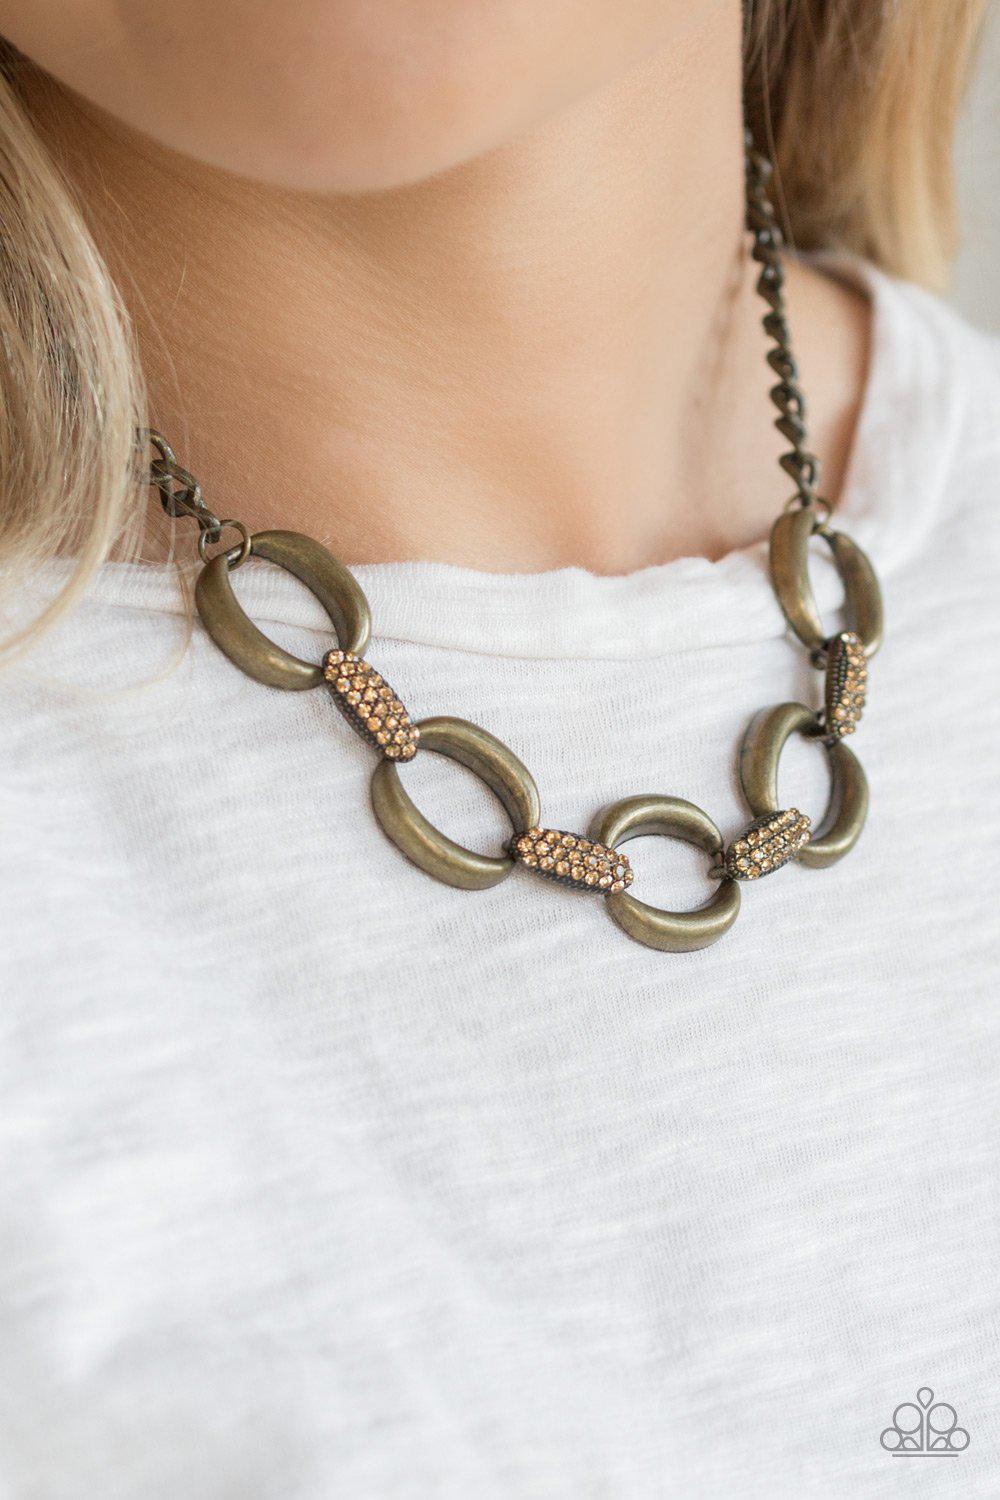 Boss Boulevard Brass and Rhinestone Chain Link Necklace - Paparazzi Accessories-CarasShop.com - $5 Jewelry by Cara Jewels